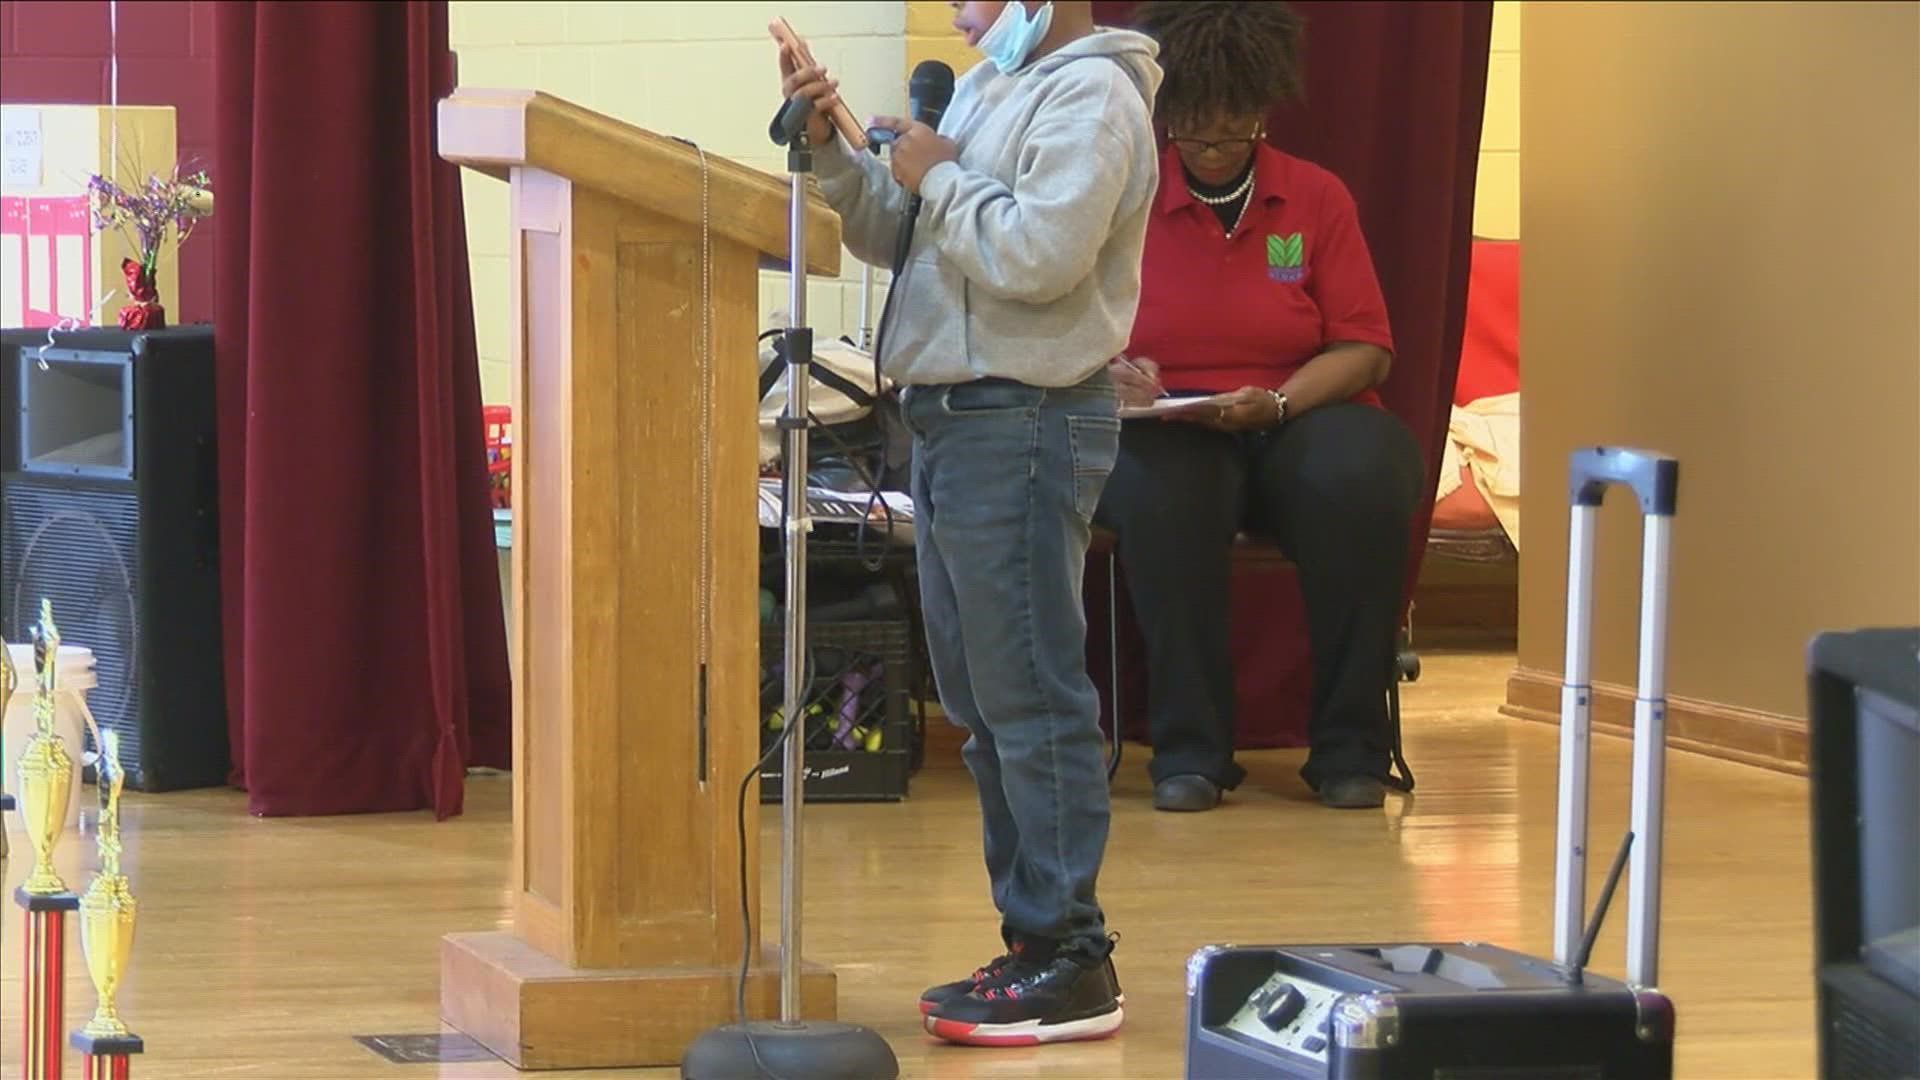 The city of Memphis held a speech contest focusing on Black history Saturday at the Orange Mound Community Center.